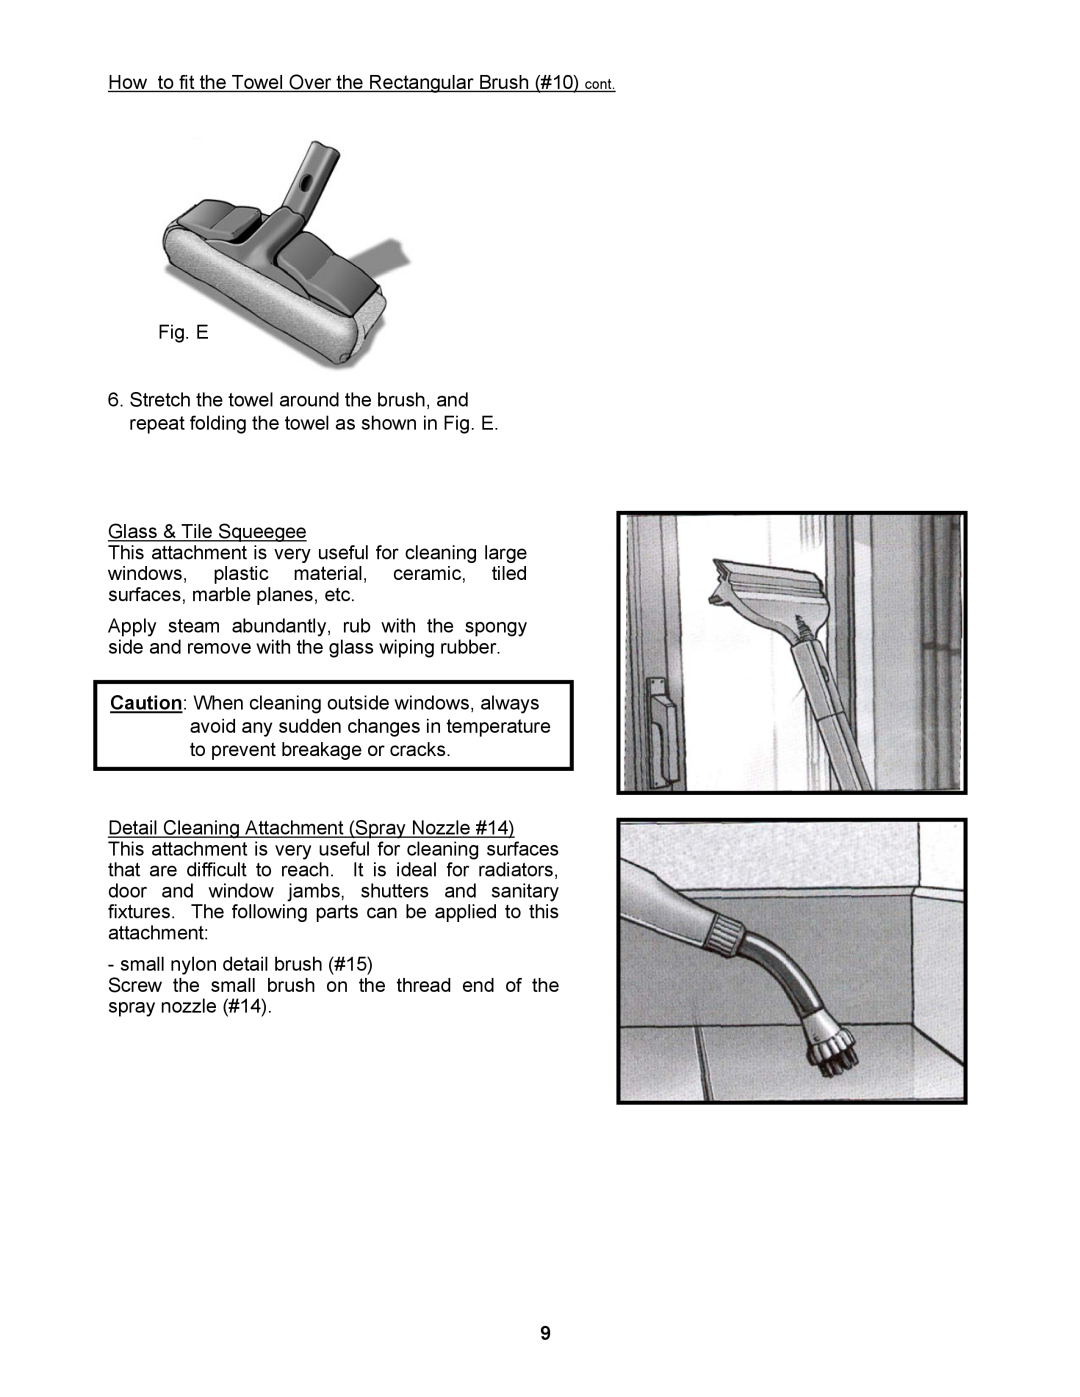 Euro-Pro EP961 warranty How to fit the Towel Over the Rectangular Brush #10 cont Fig. E, Glass & Tile Squeegee 